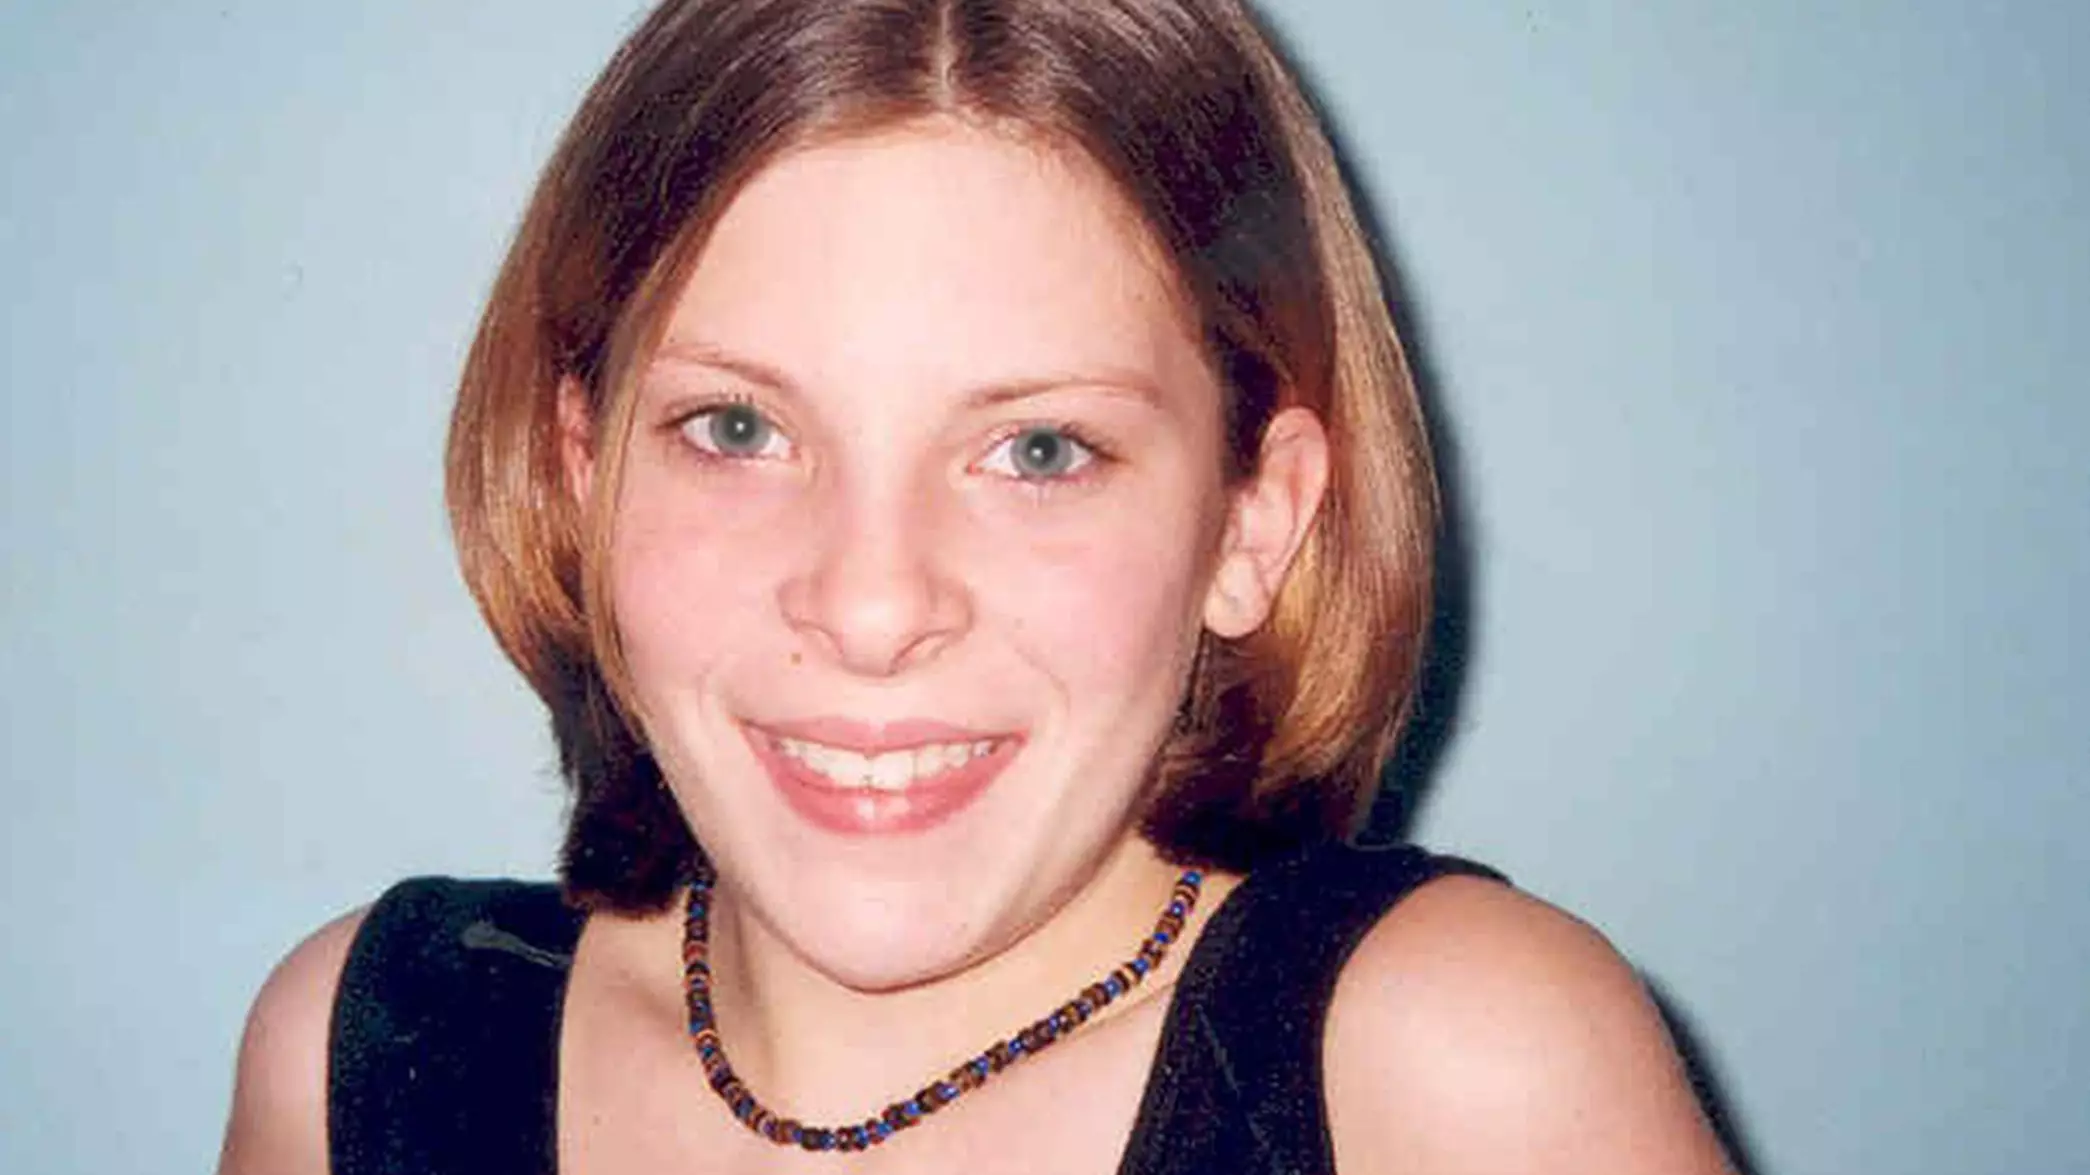 Top UK Detective Speaks Out About Finding Milly Dowler's Killer